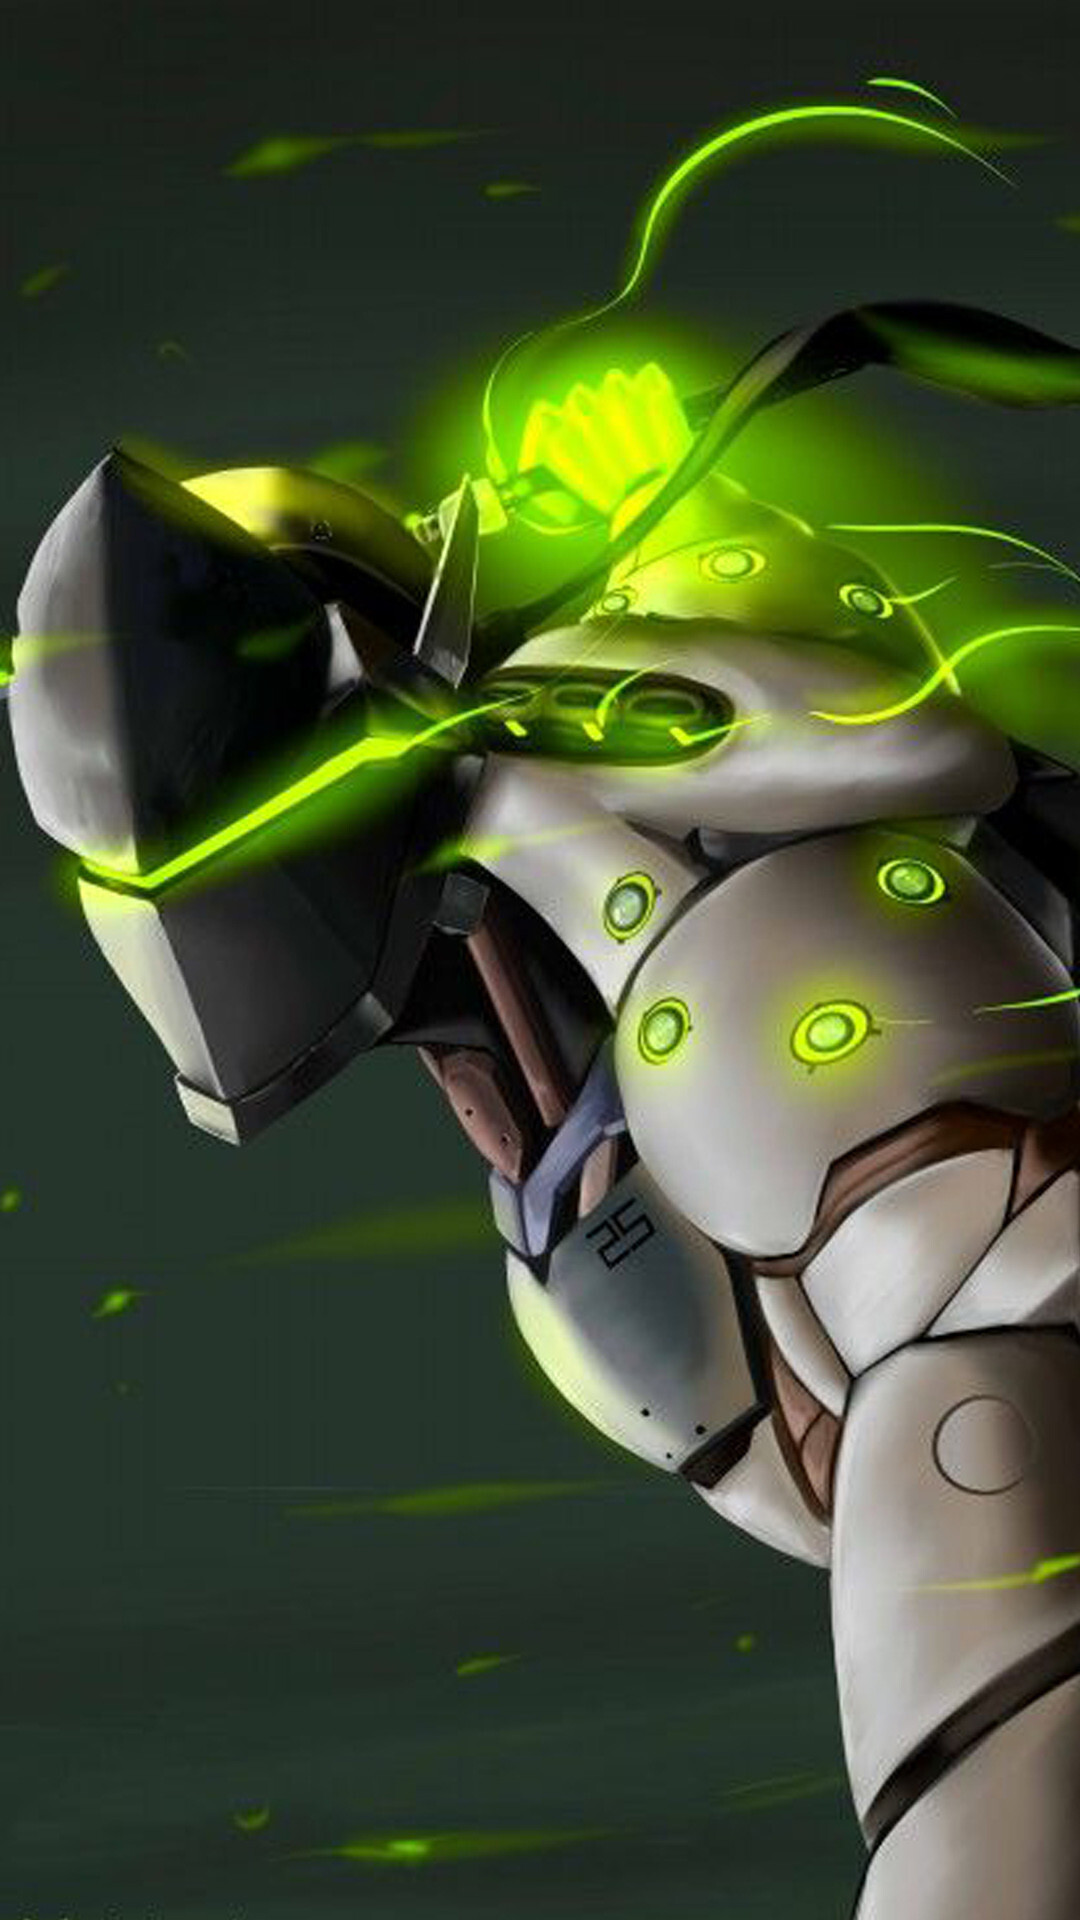 Genji: Overwatch, Removes the blade at the end of Dragonblade's duration regaining the use of his shurikens. 1080x1920 Full HD Wallpaper.